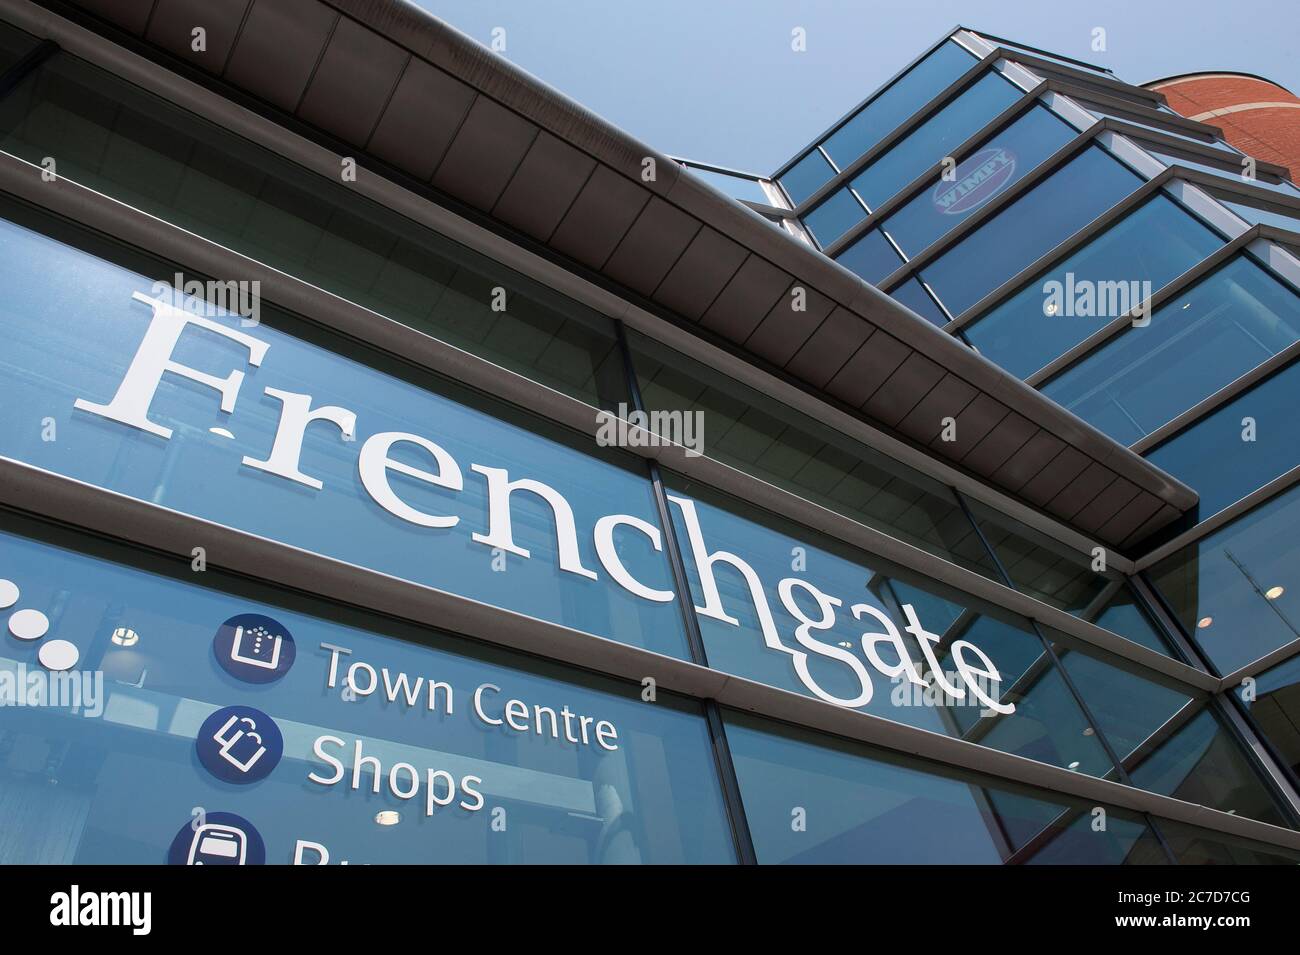 Entrance to Frenchgate shopping centre in Doncaster town centre, Yorkshire, England. Stock Photo